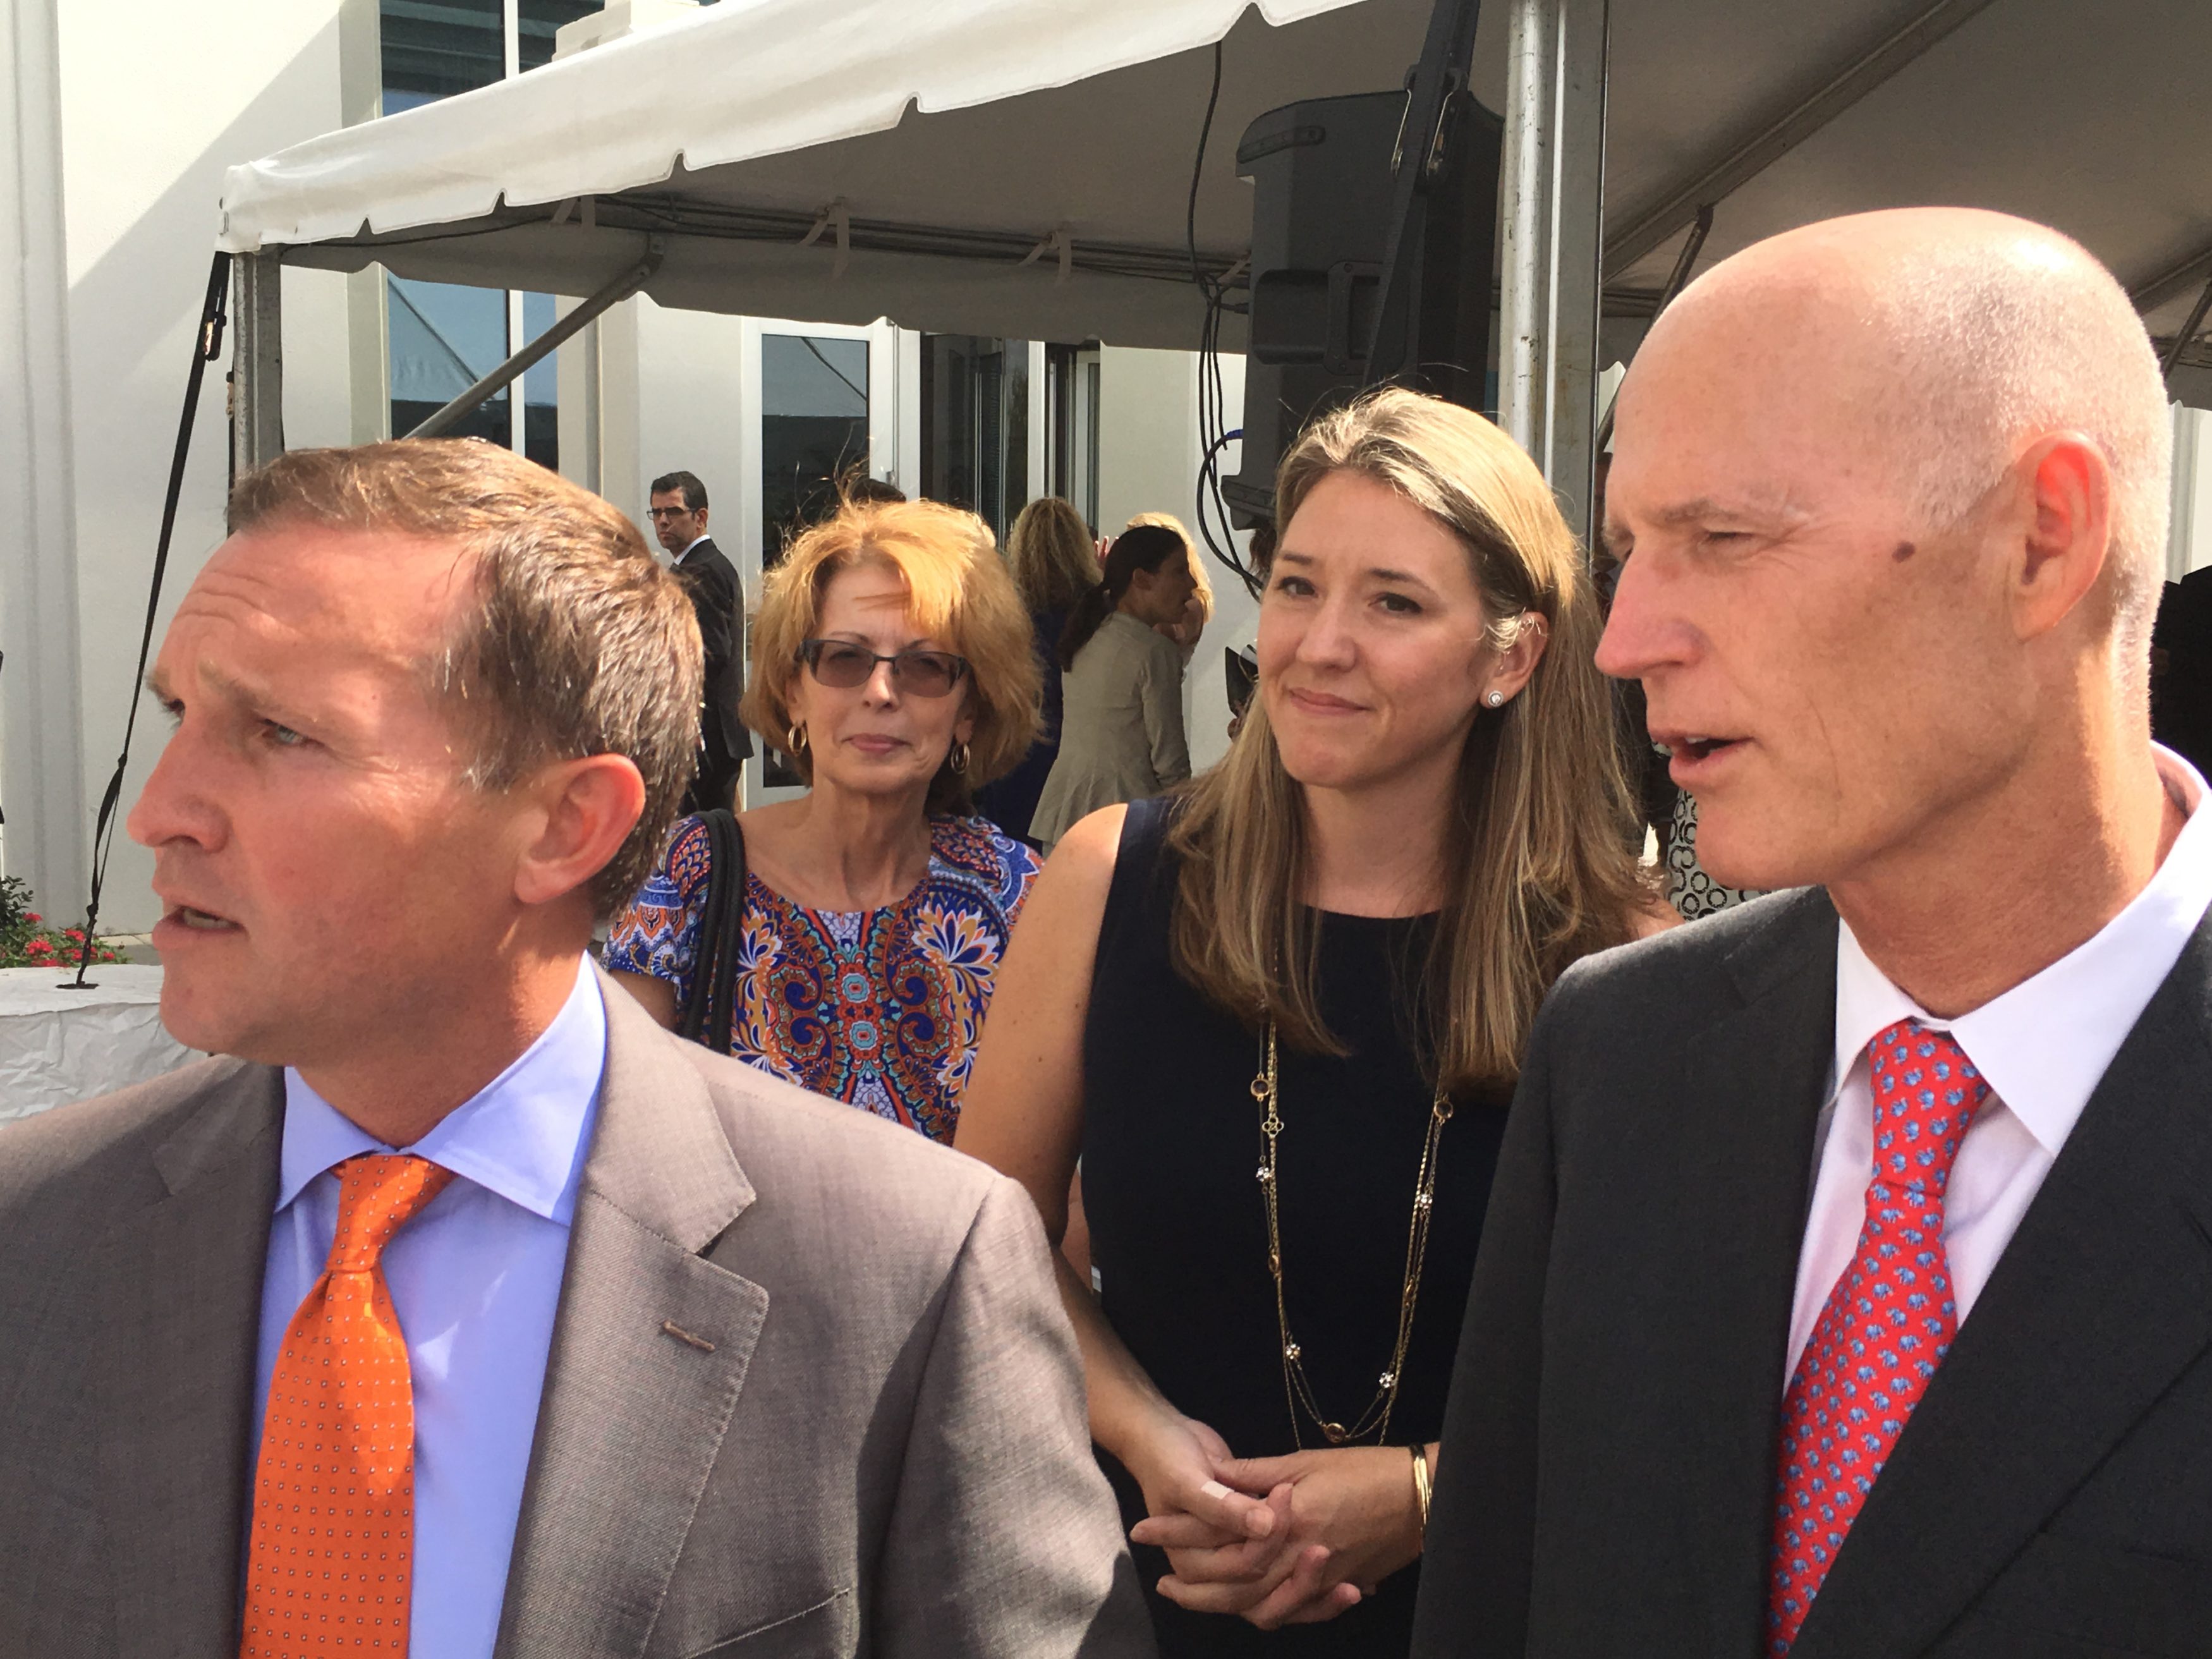 Lenny Curry and Rick Scott